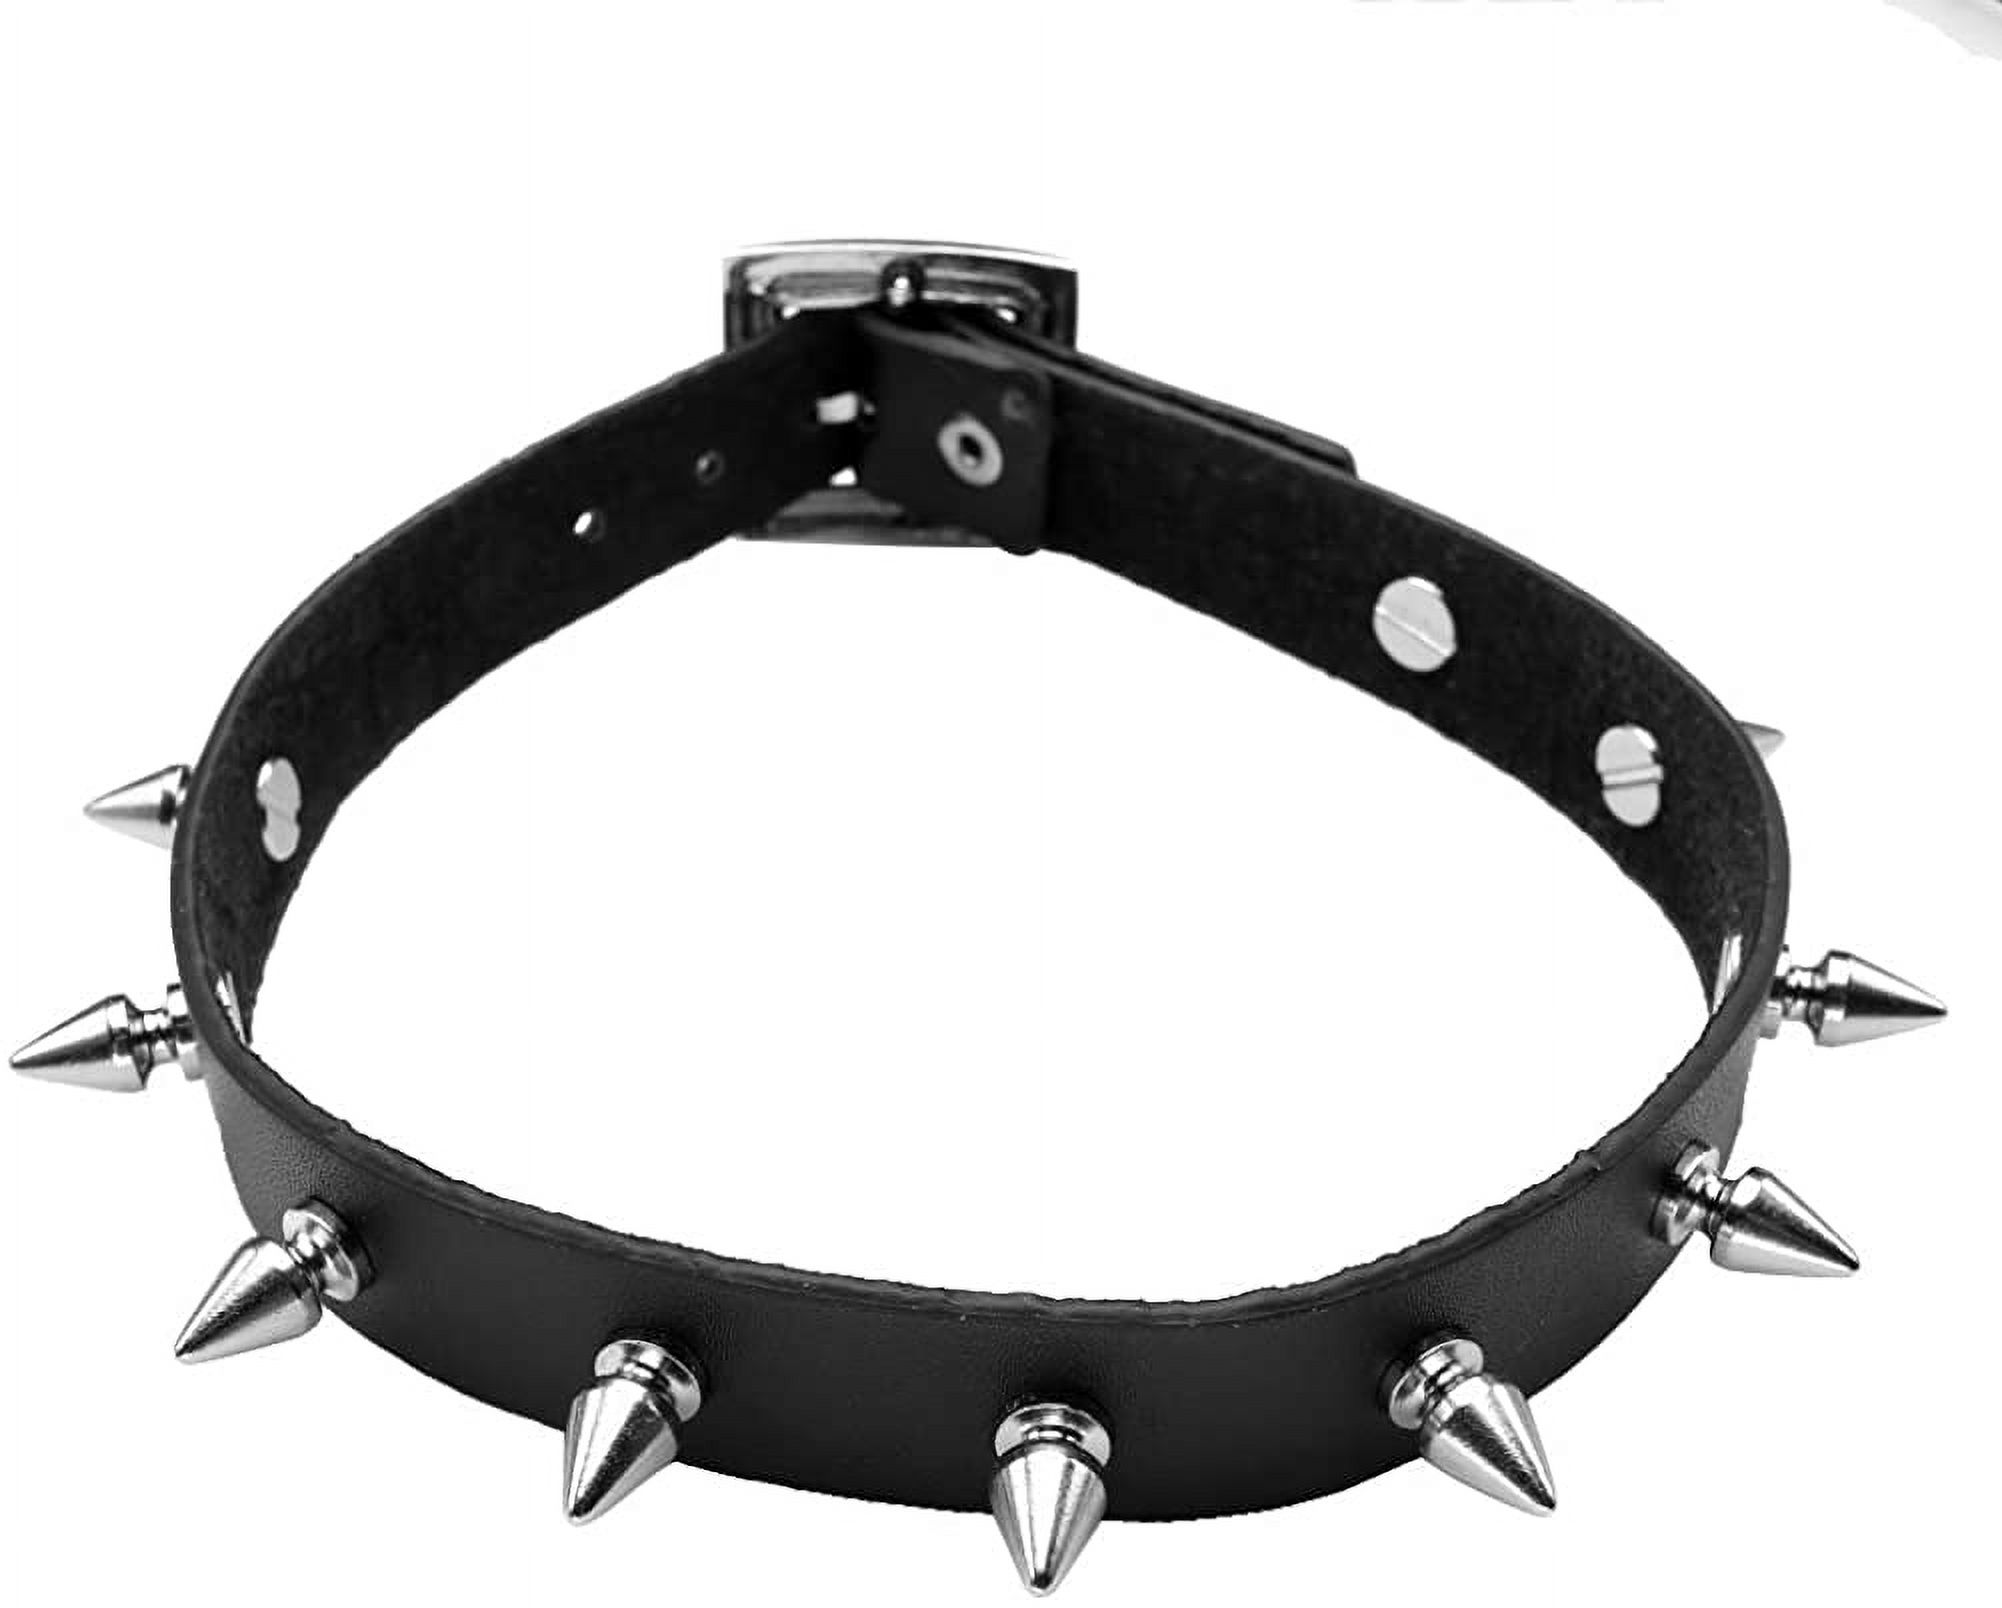 Fashion Women Men Cool Punk Goth Metal Spike Studded Leather Collar Choker Necklace, Men's, Size: One size, Black